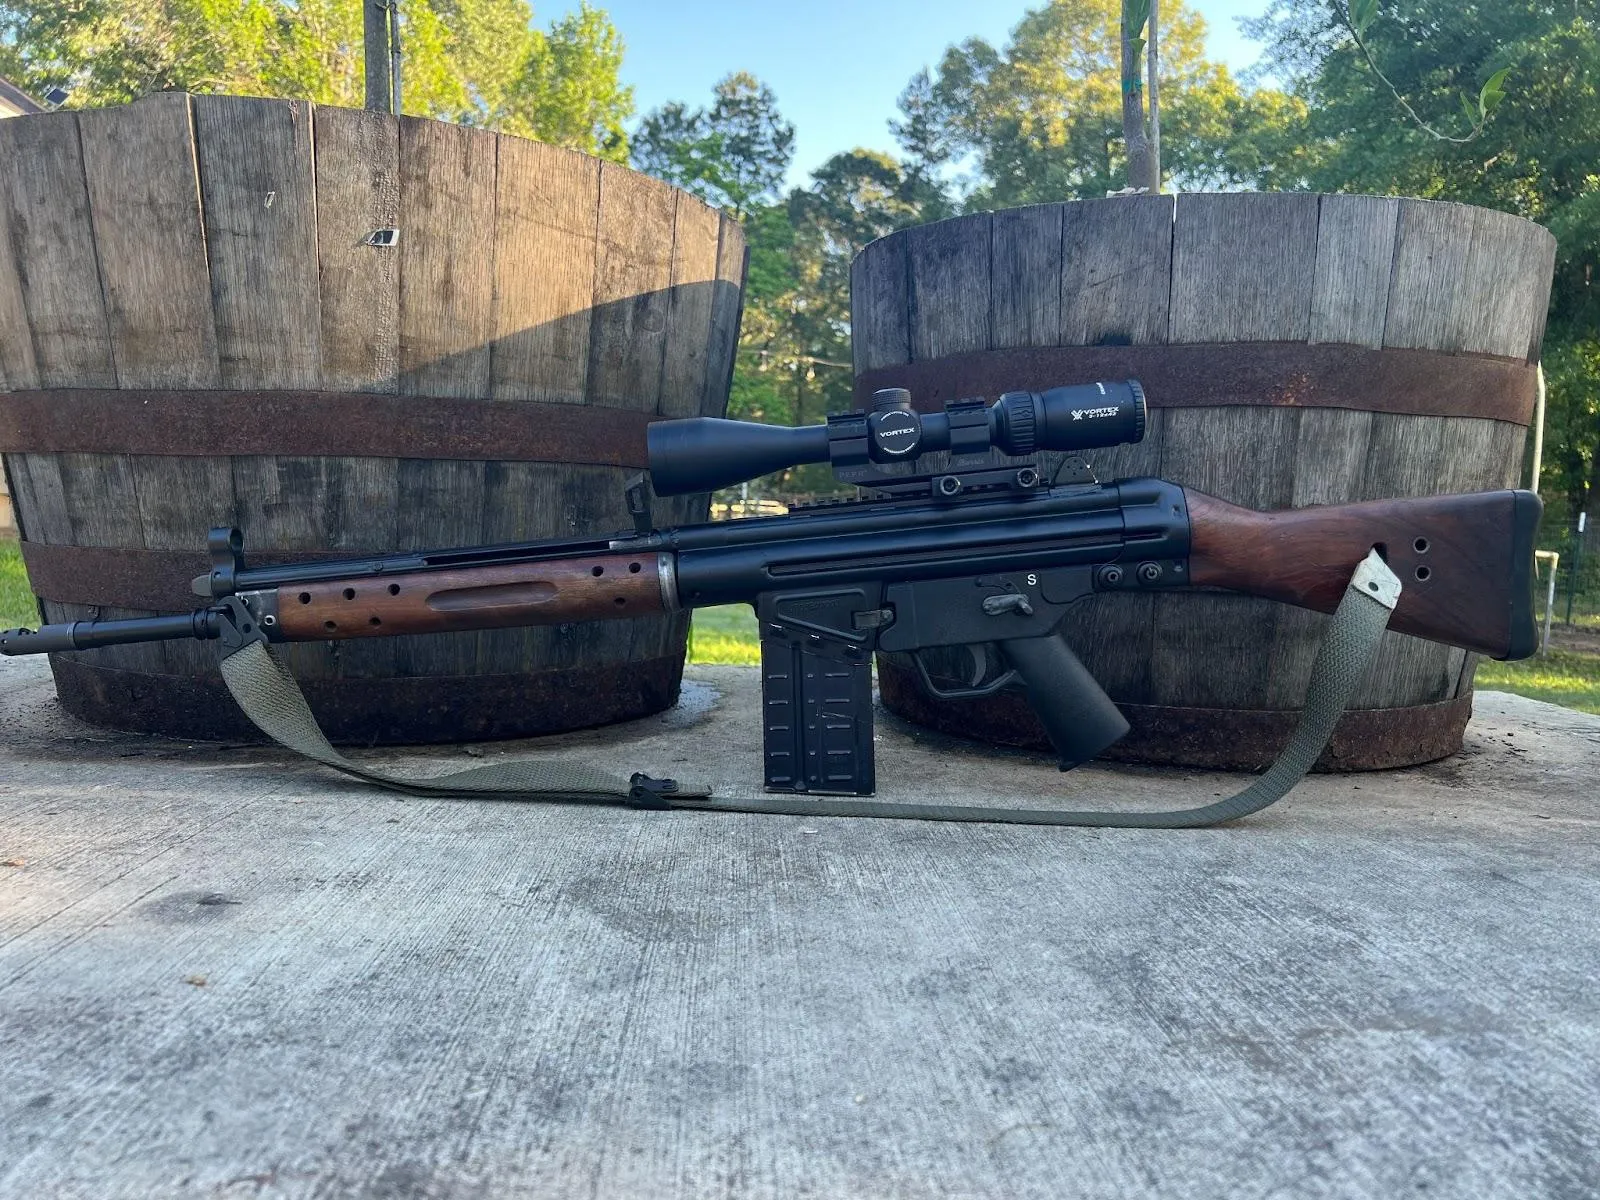 century arms c308 in front of two barrels